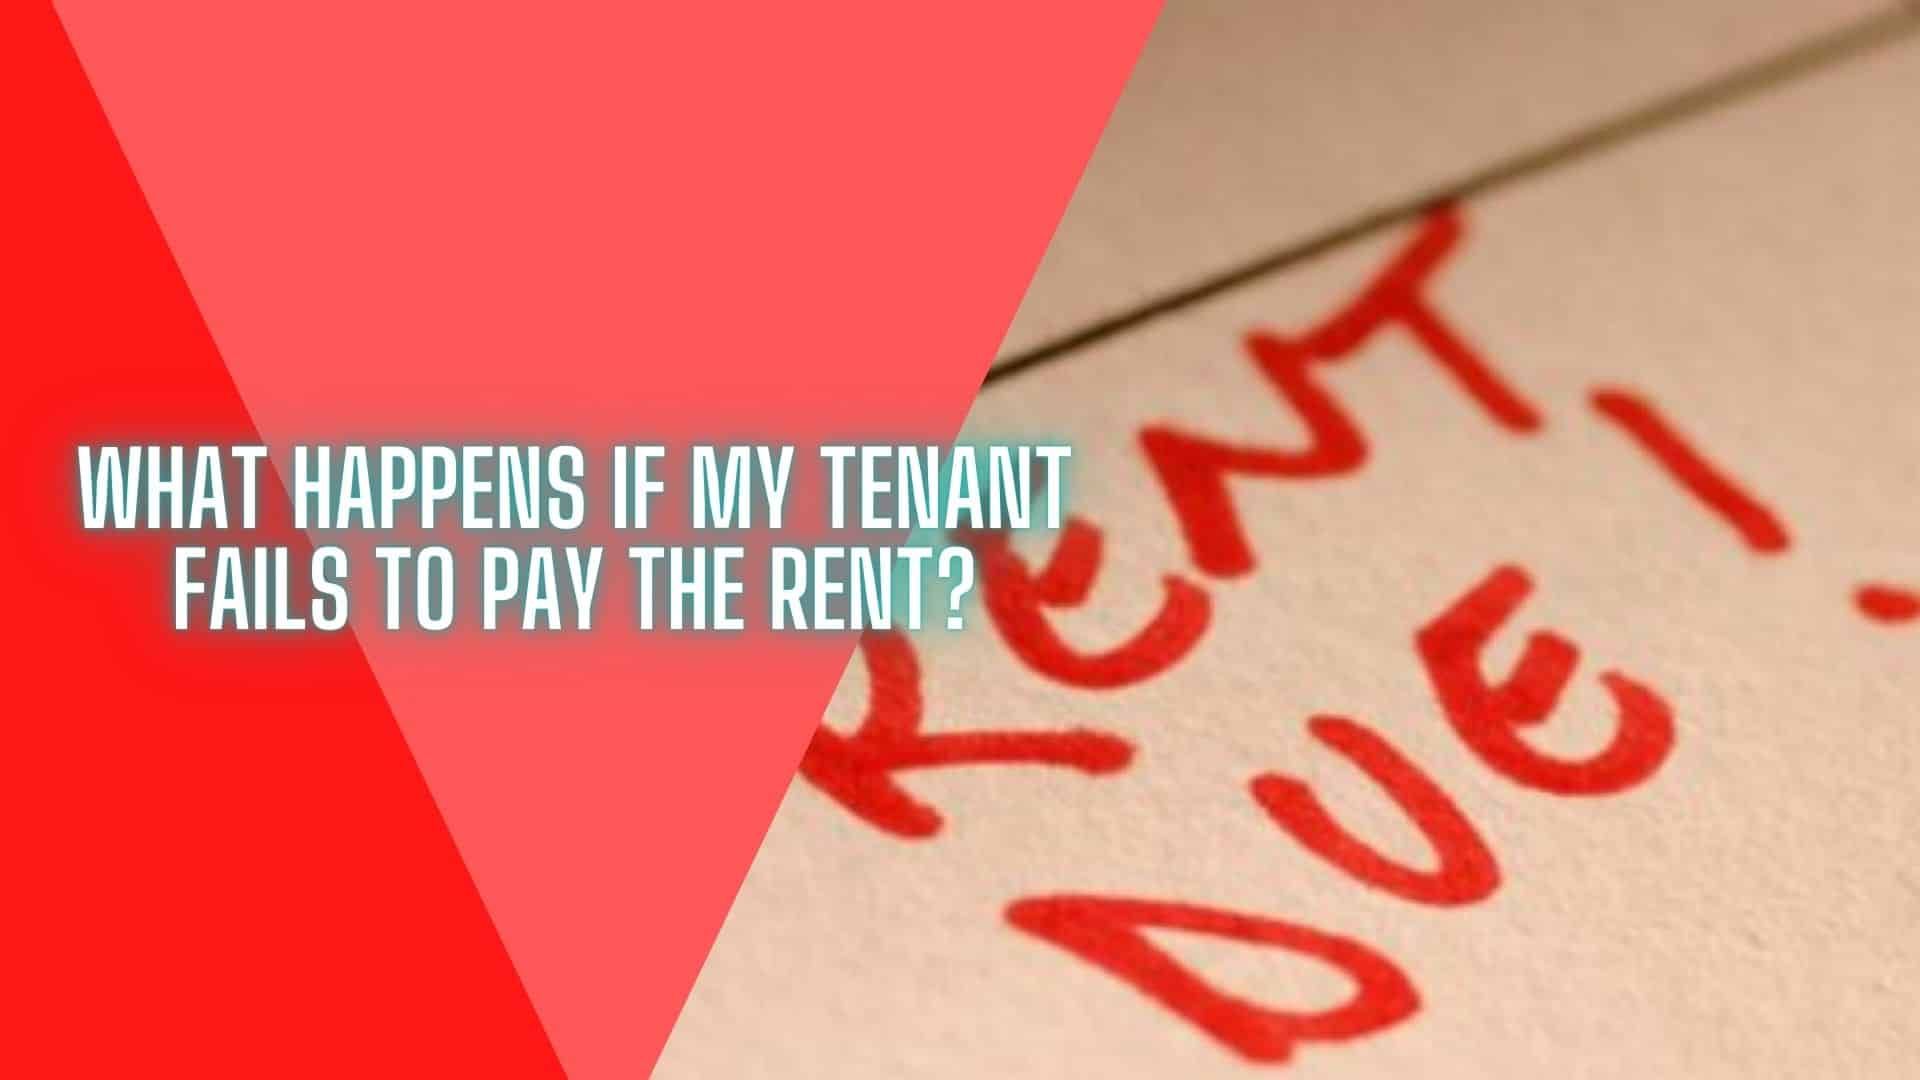 What Happens If My Tenant Fails To Pay The Rent?